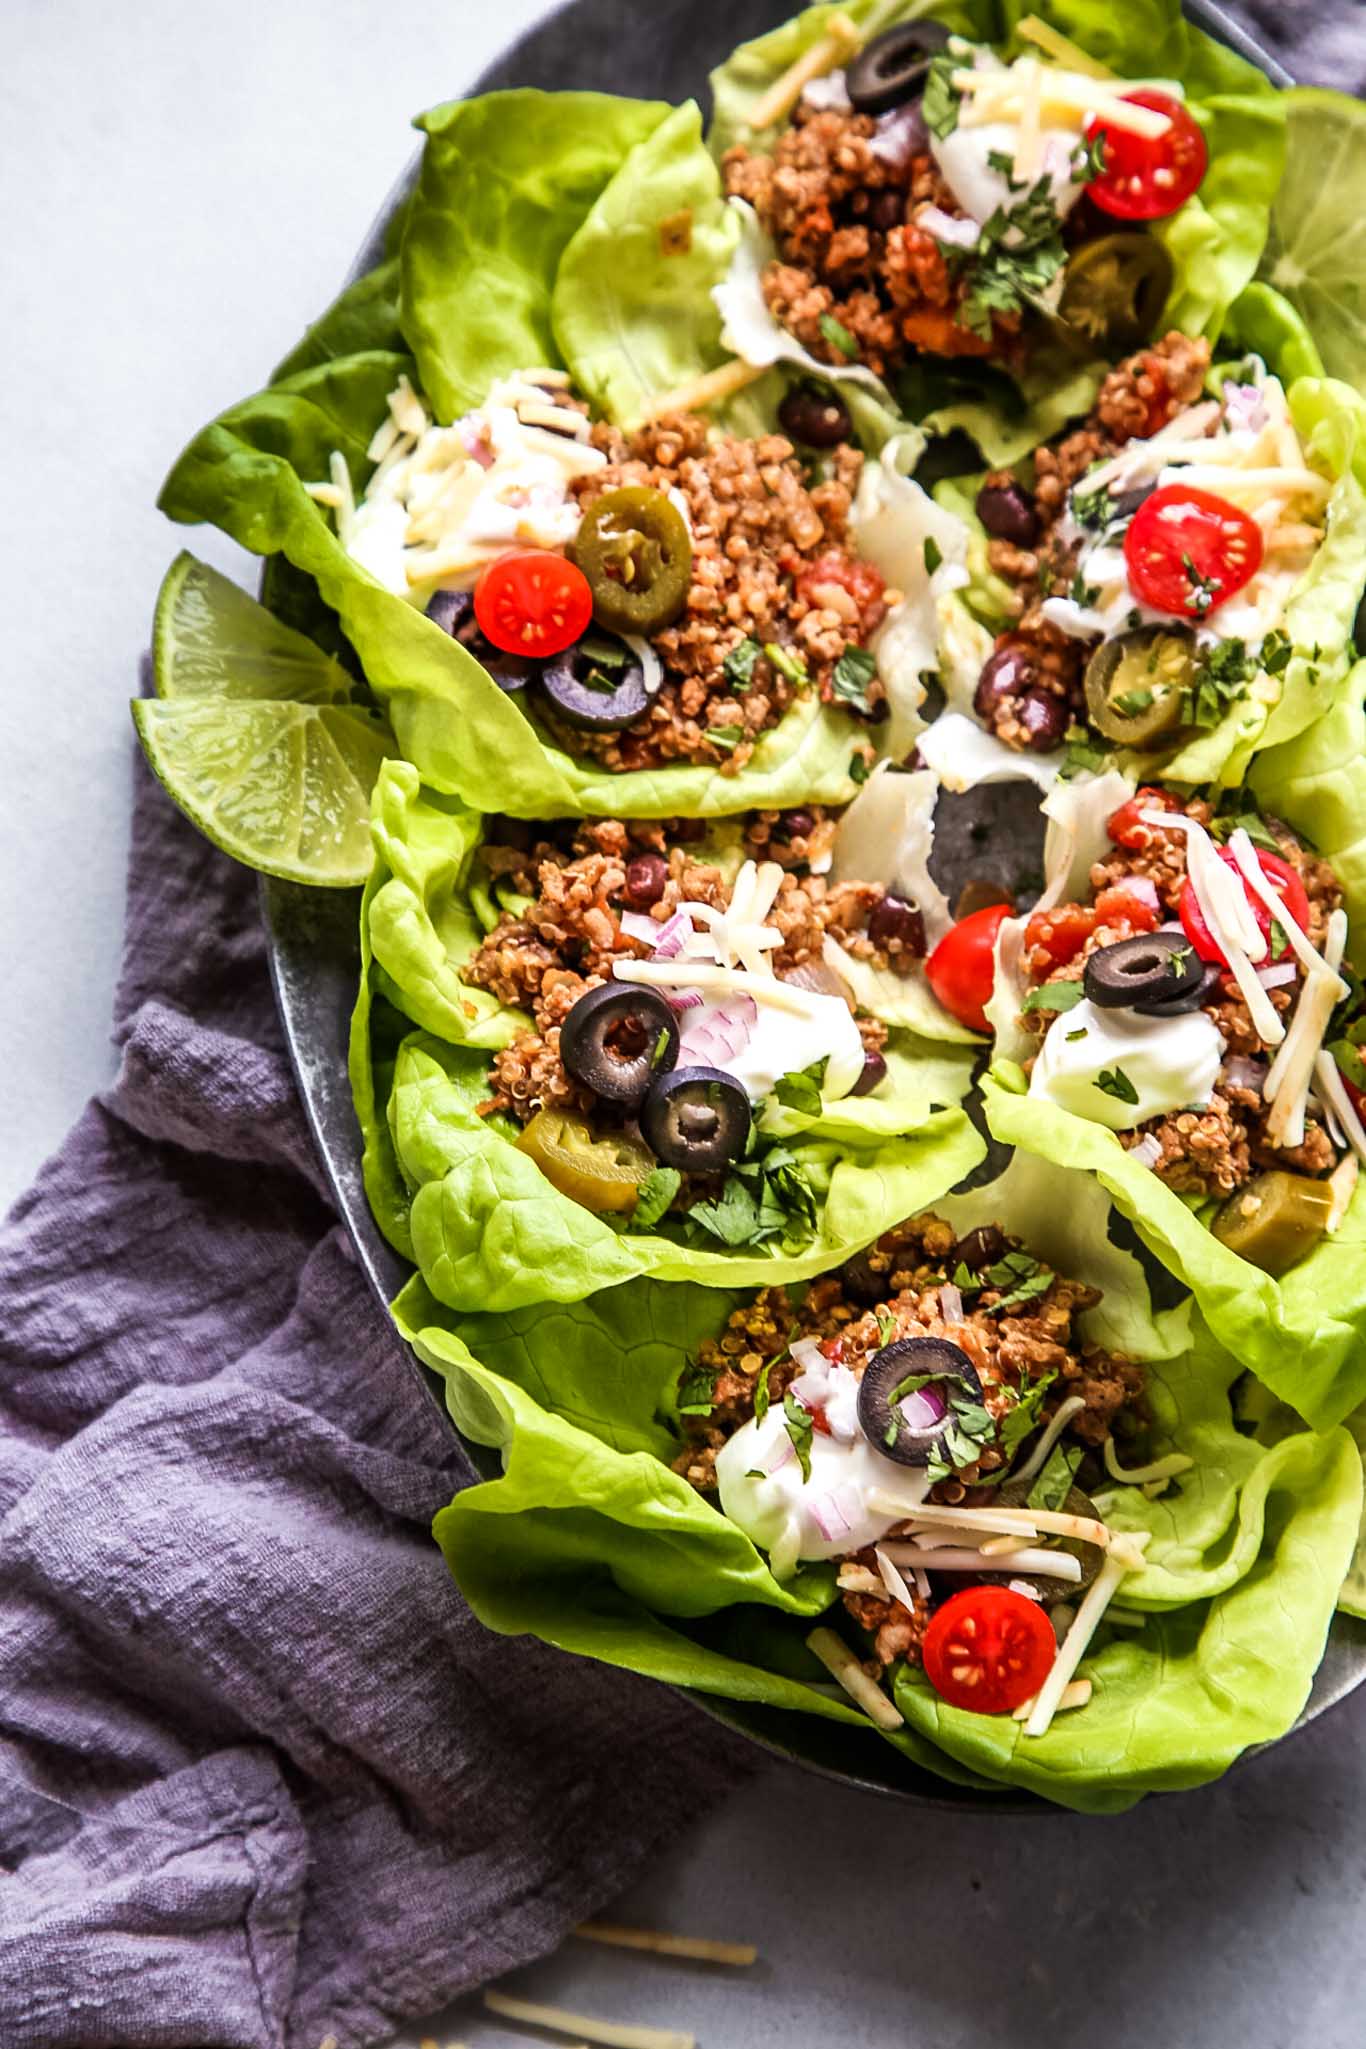 Taco Quinoa & Turkey Lettuce Wraps make a hearty, healthy, protein packed meal that’s amazingly delicious and quick and easy to prepare. They’re perfect for meal prep too.